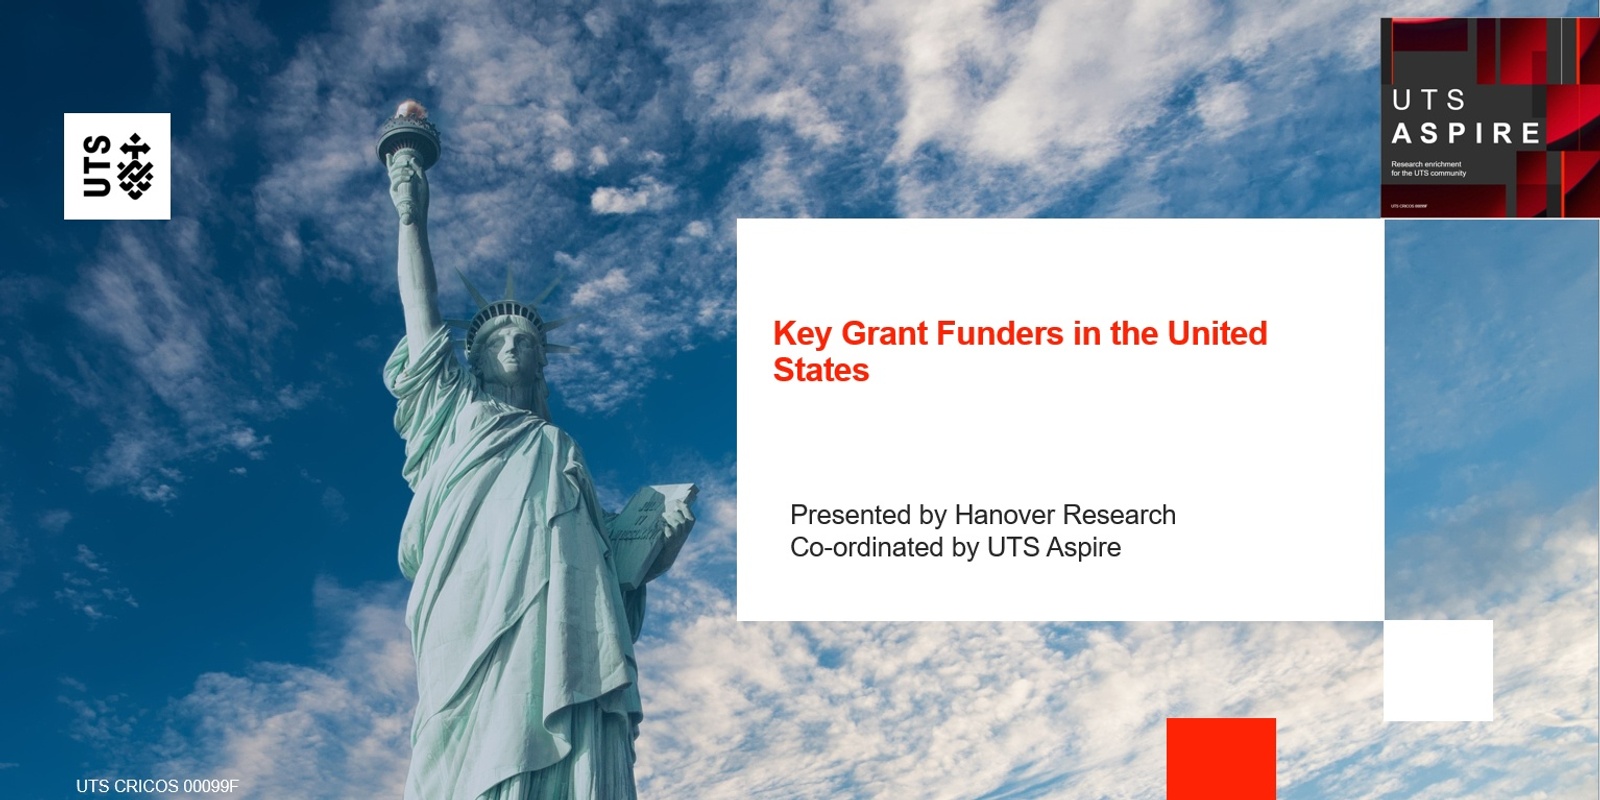 Hanover Research - Key Grant Funders in the United States